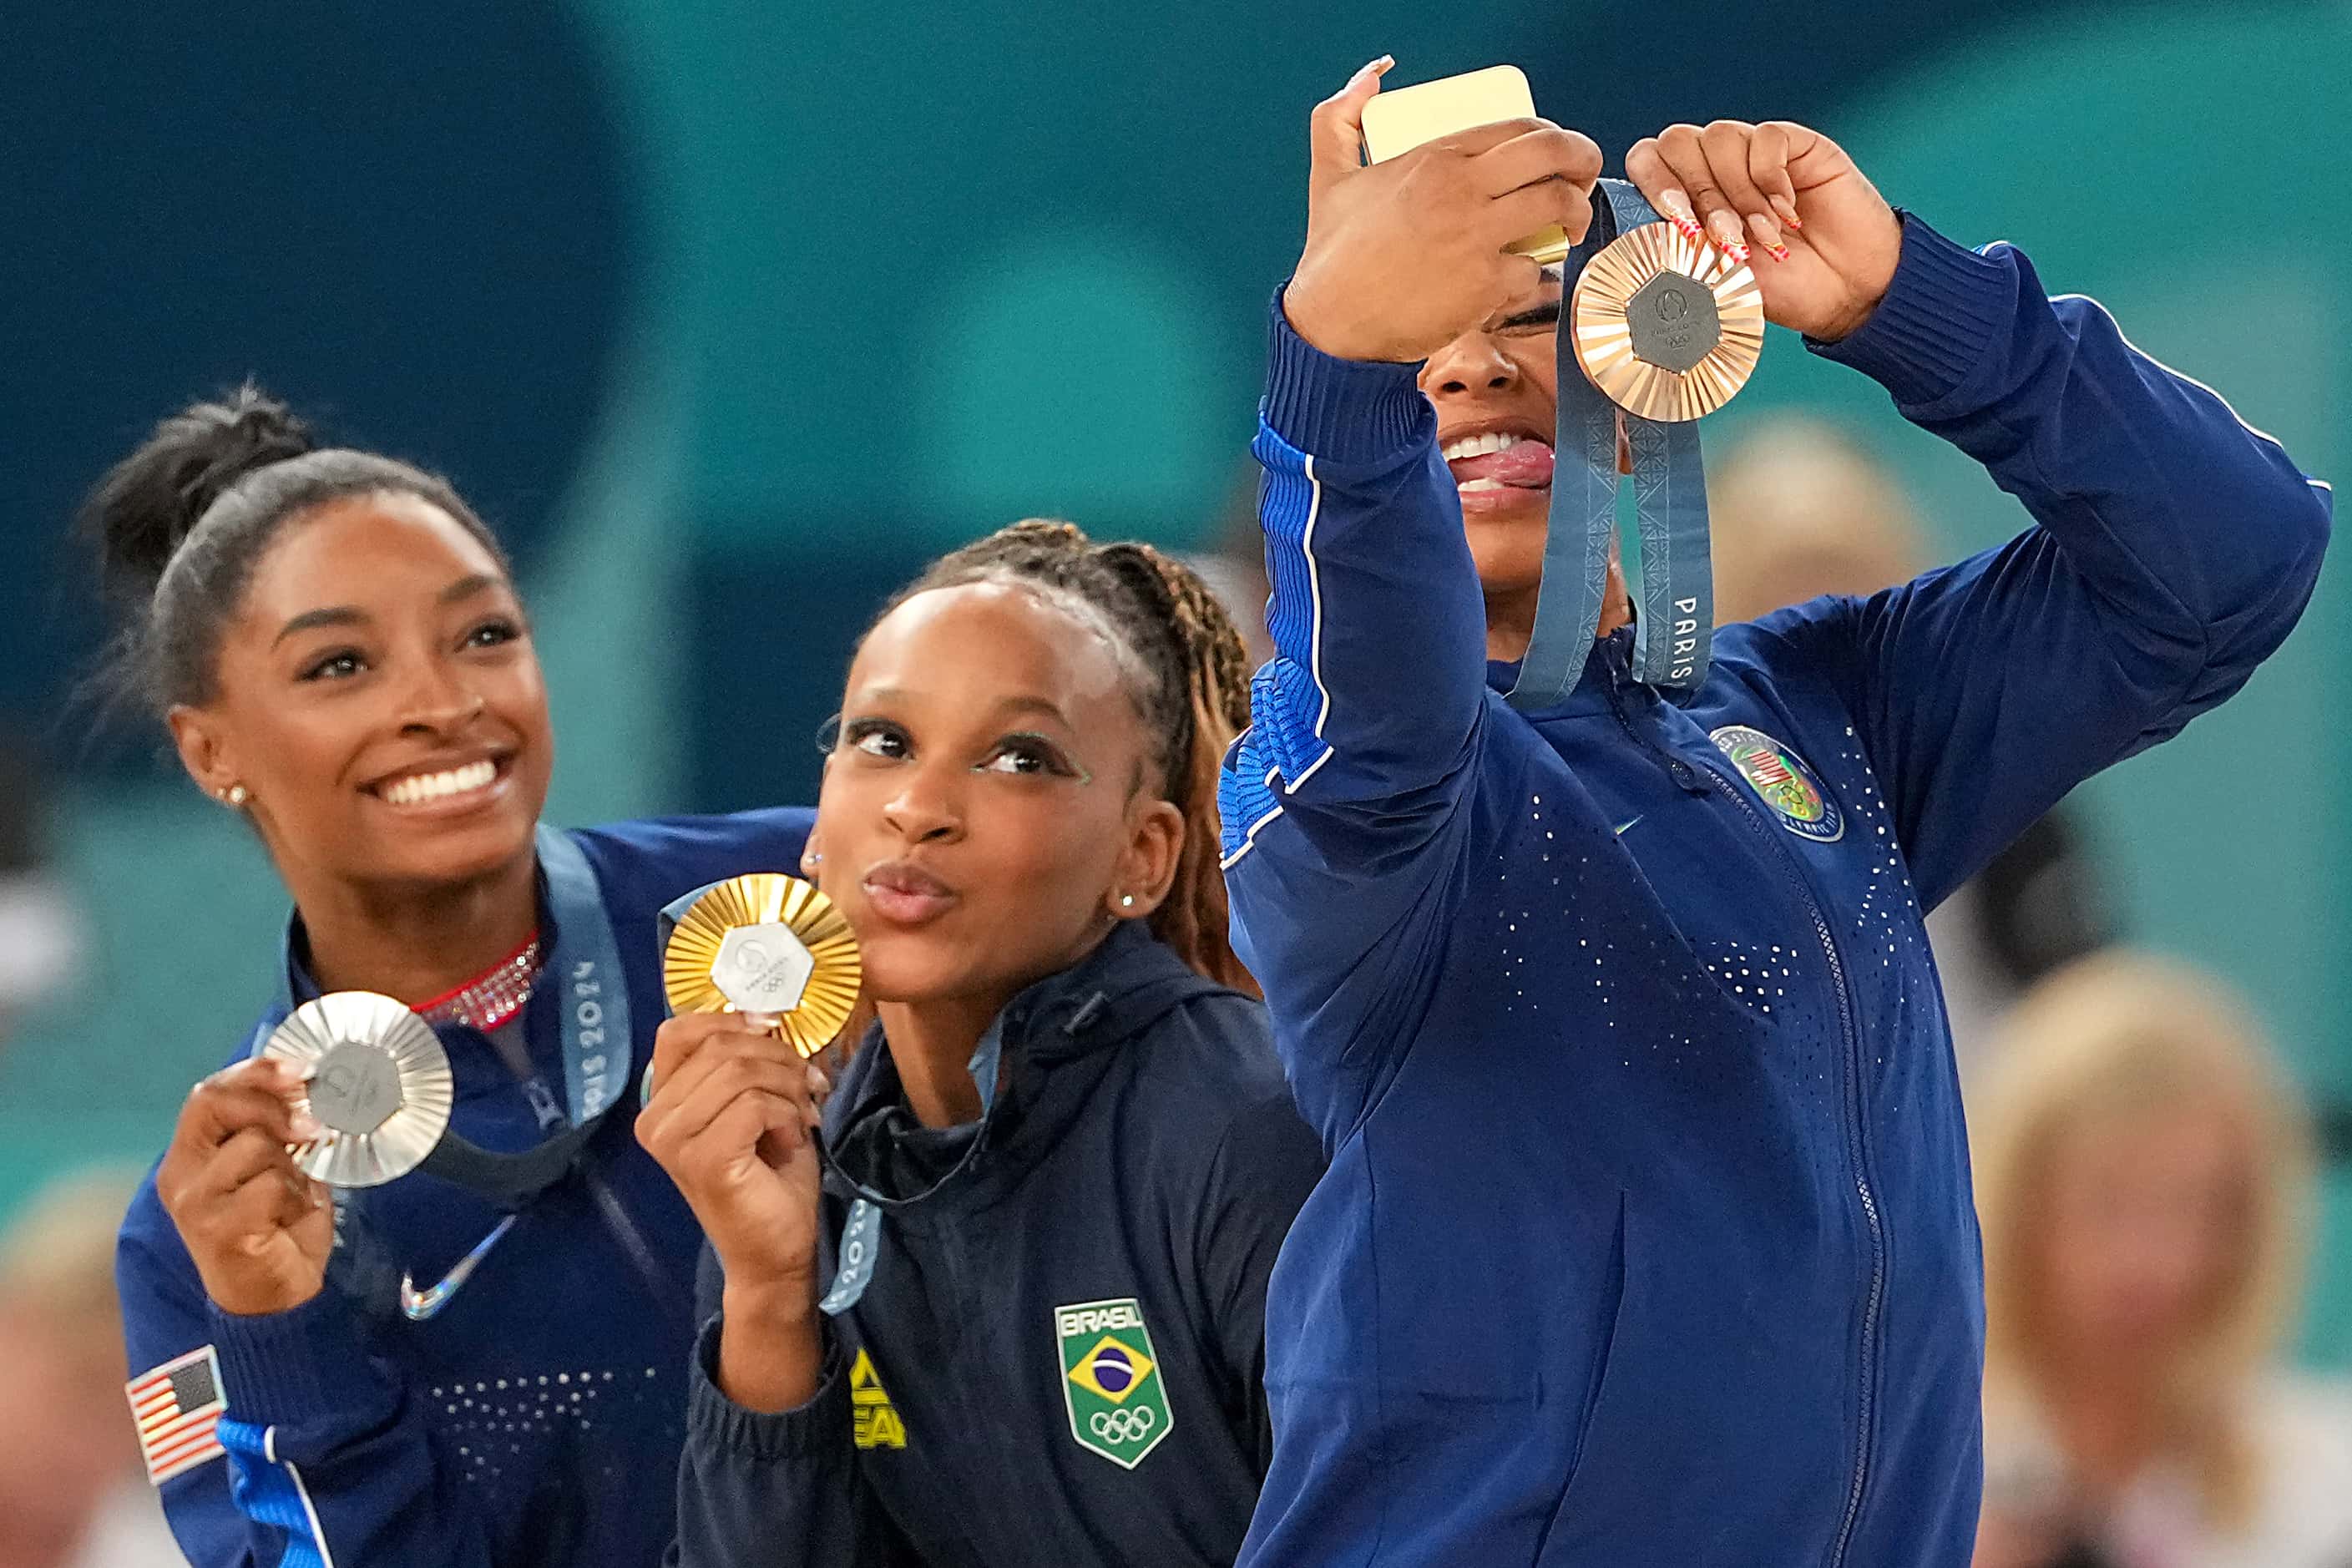 Bonze medalist Jordan Chiles of the United States takes a selfie with gold medalist Rebeca...